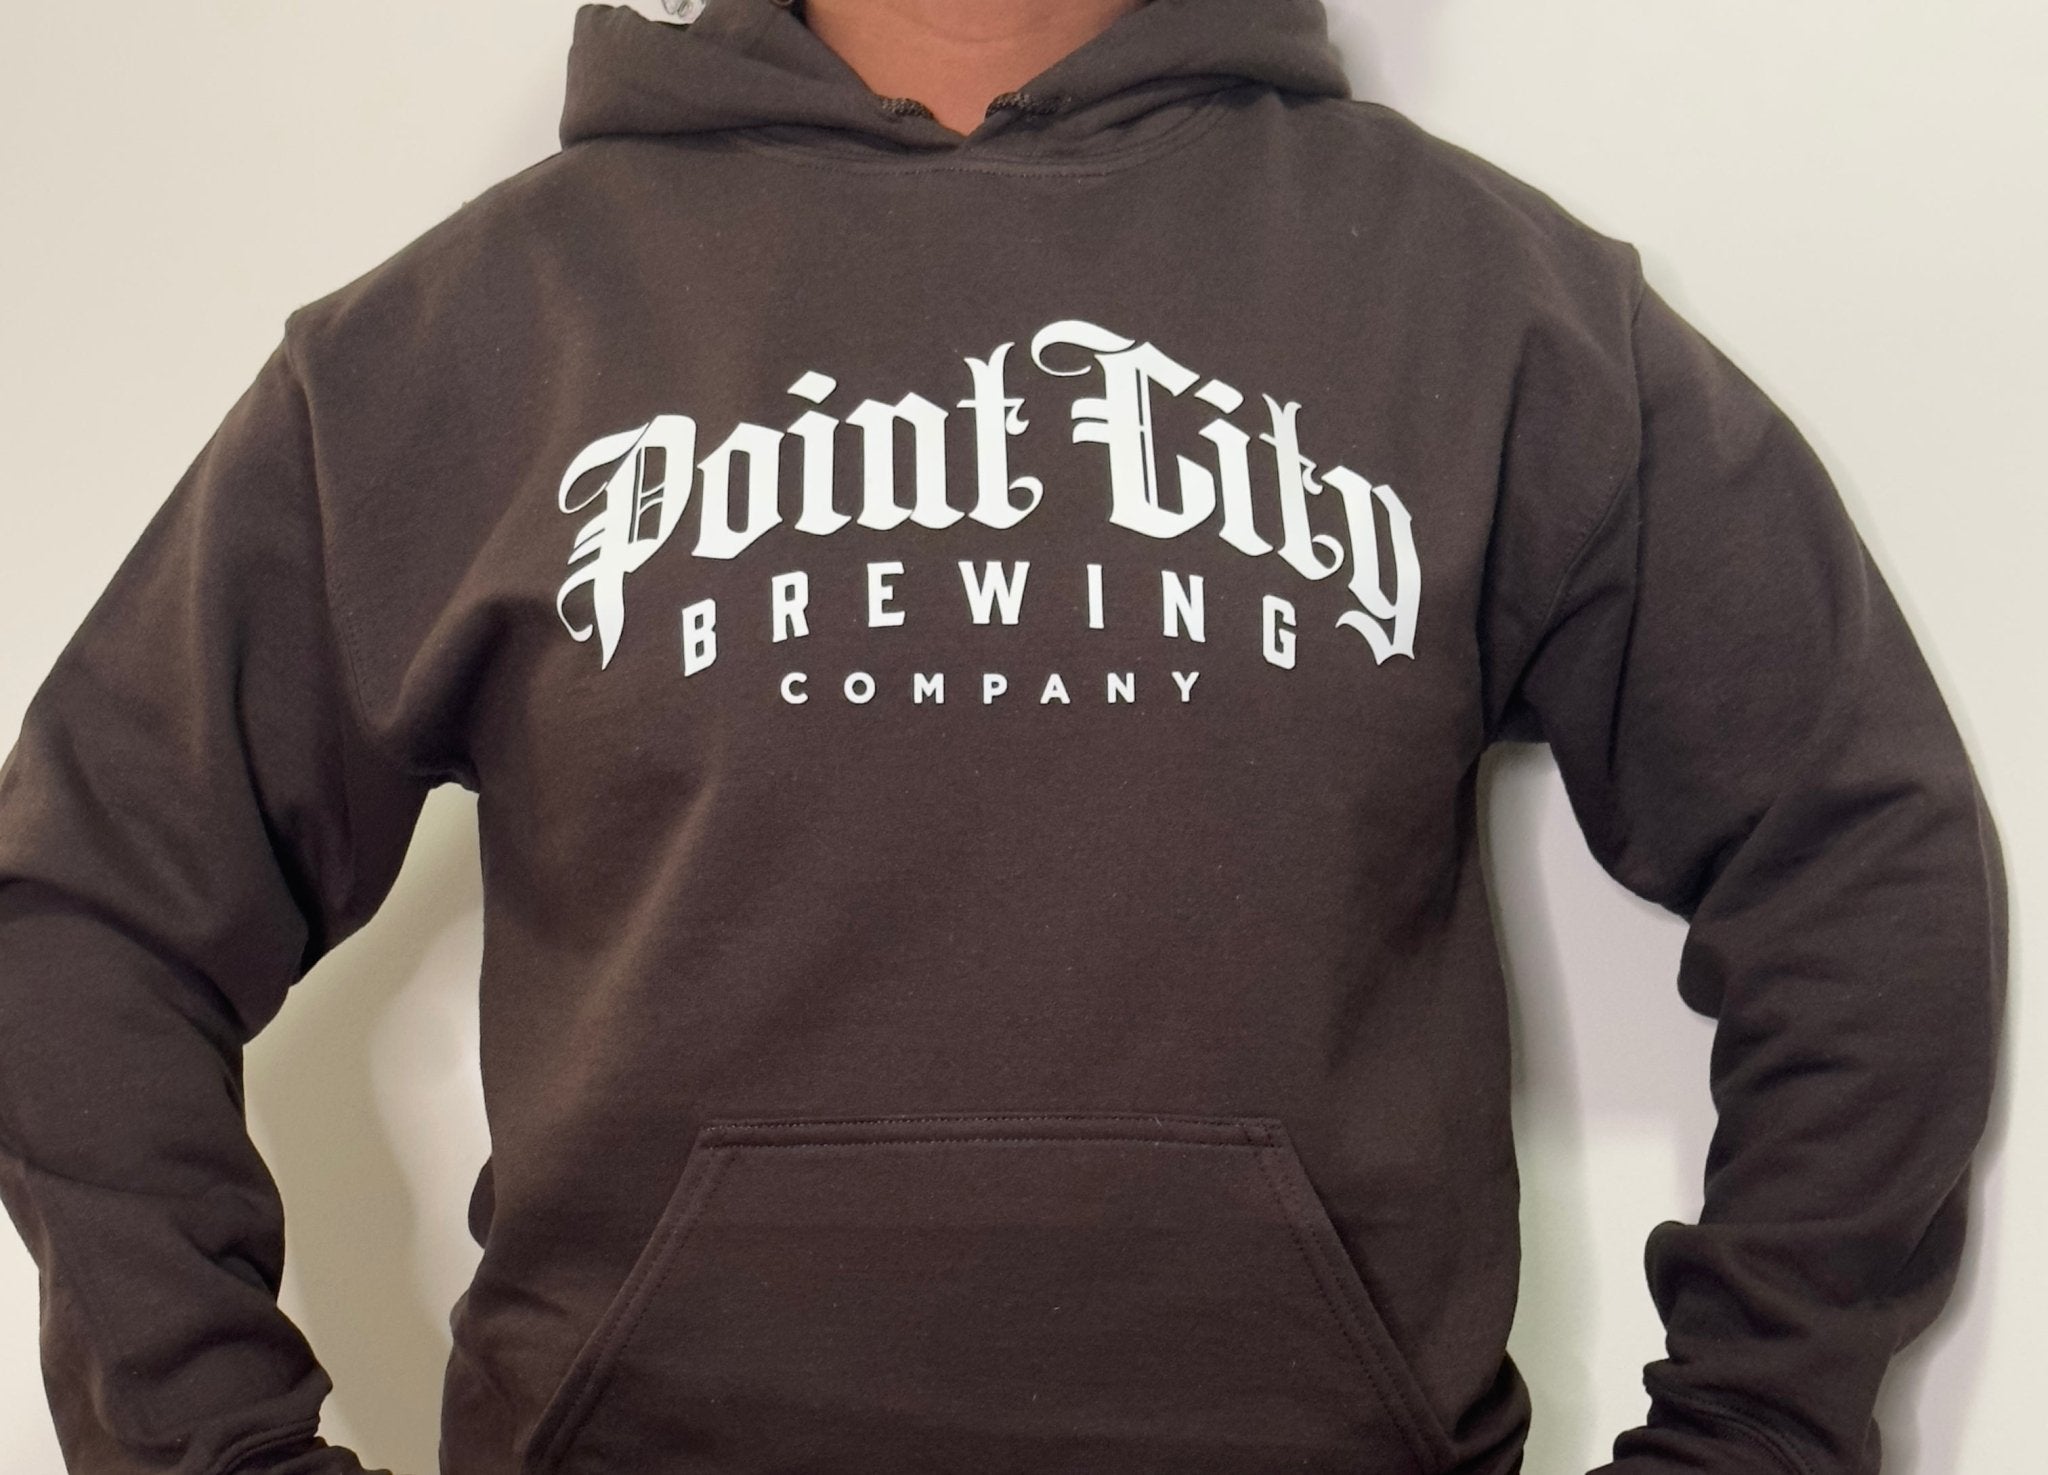 PCB word mark Hoodie - Point City Brewing Company